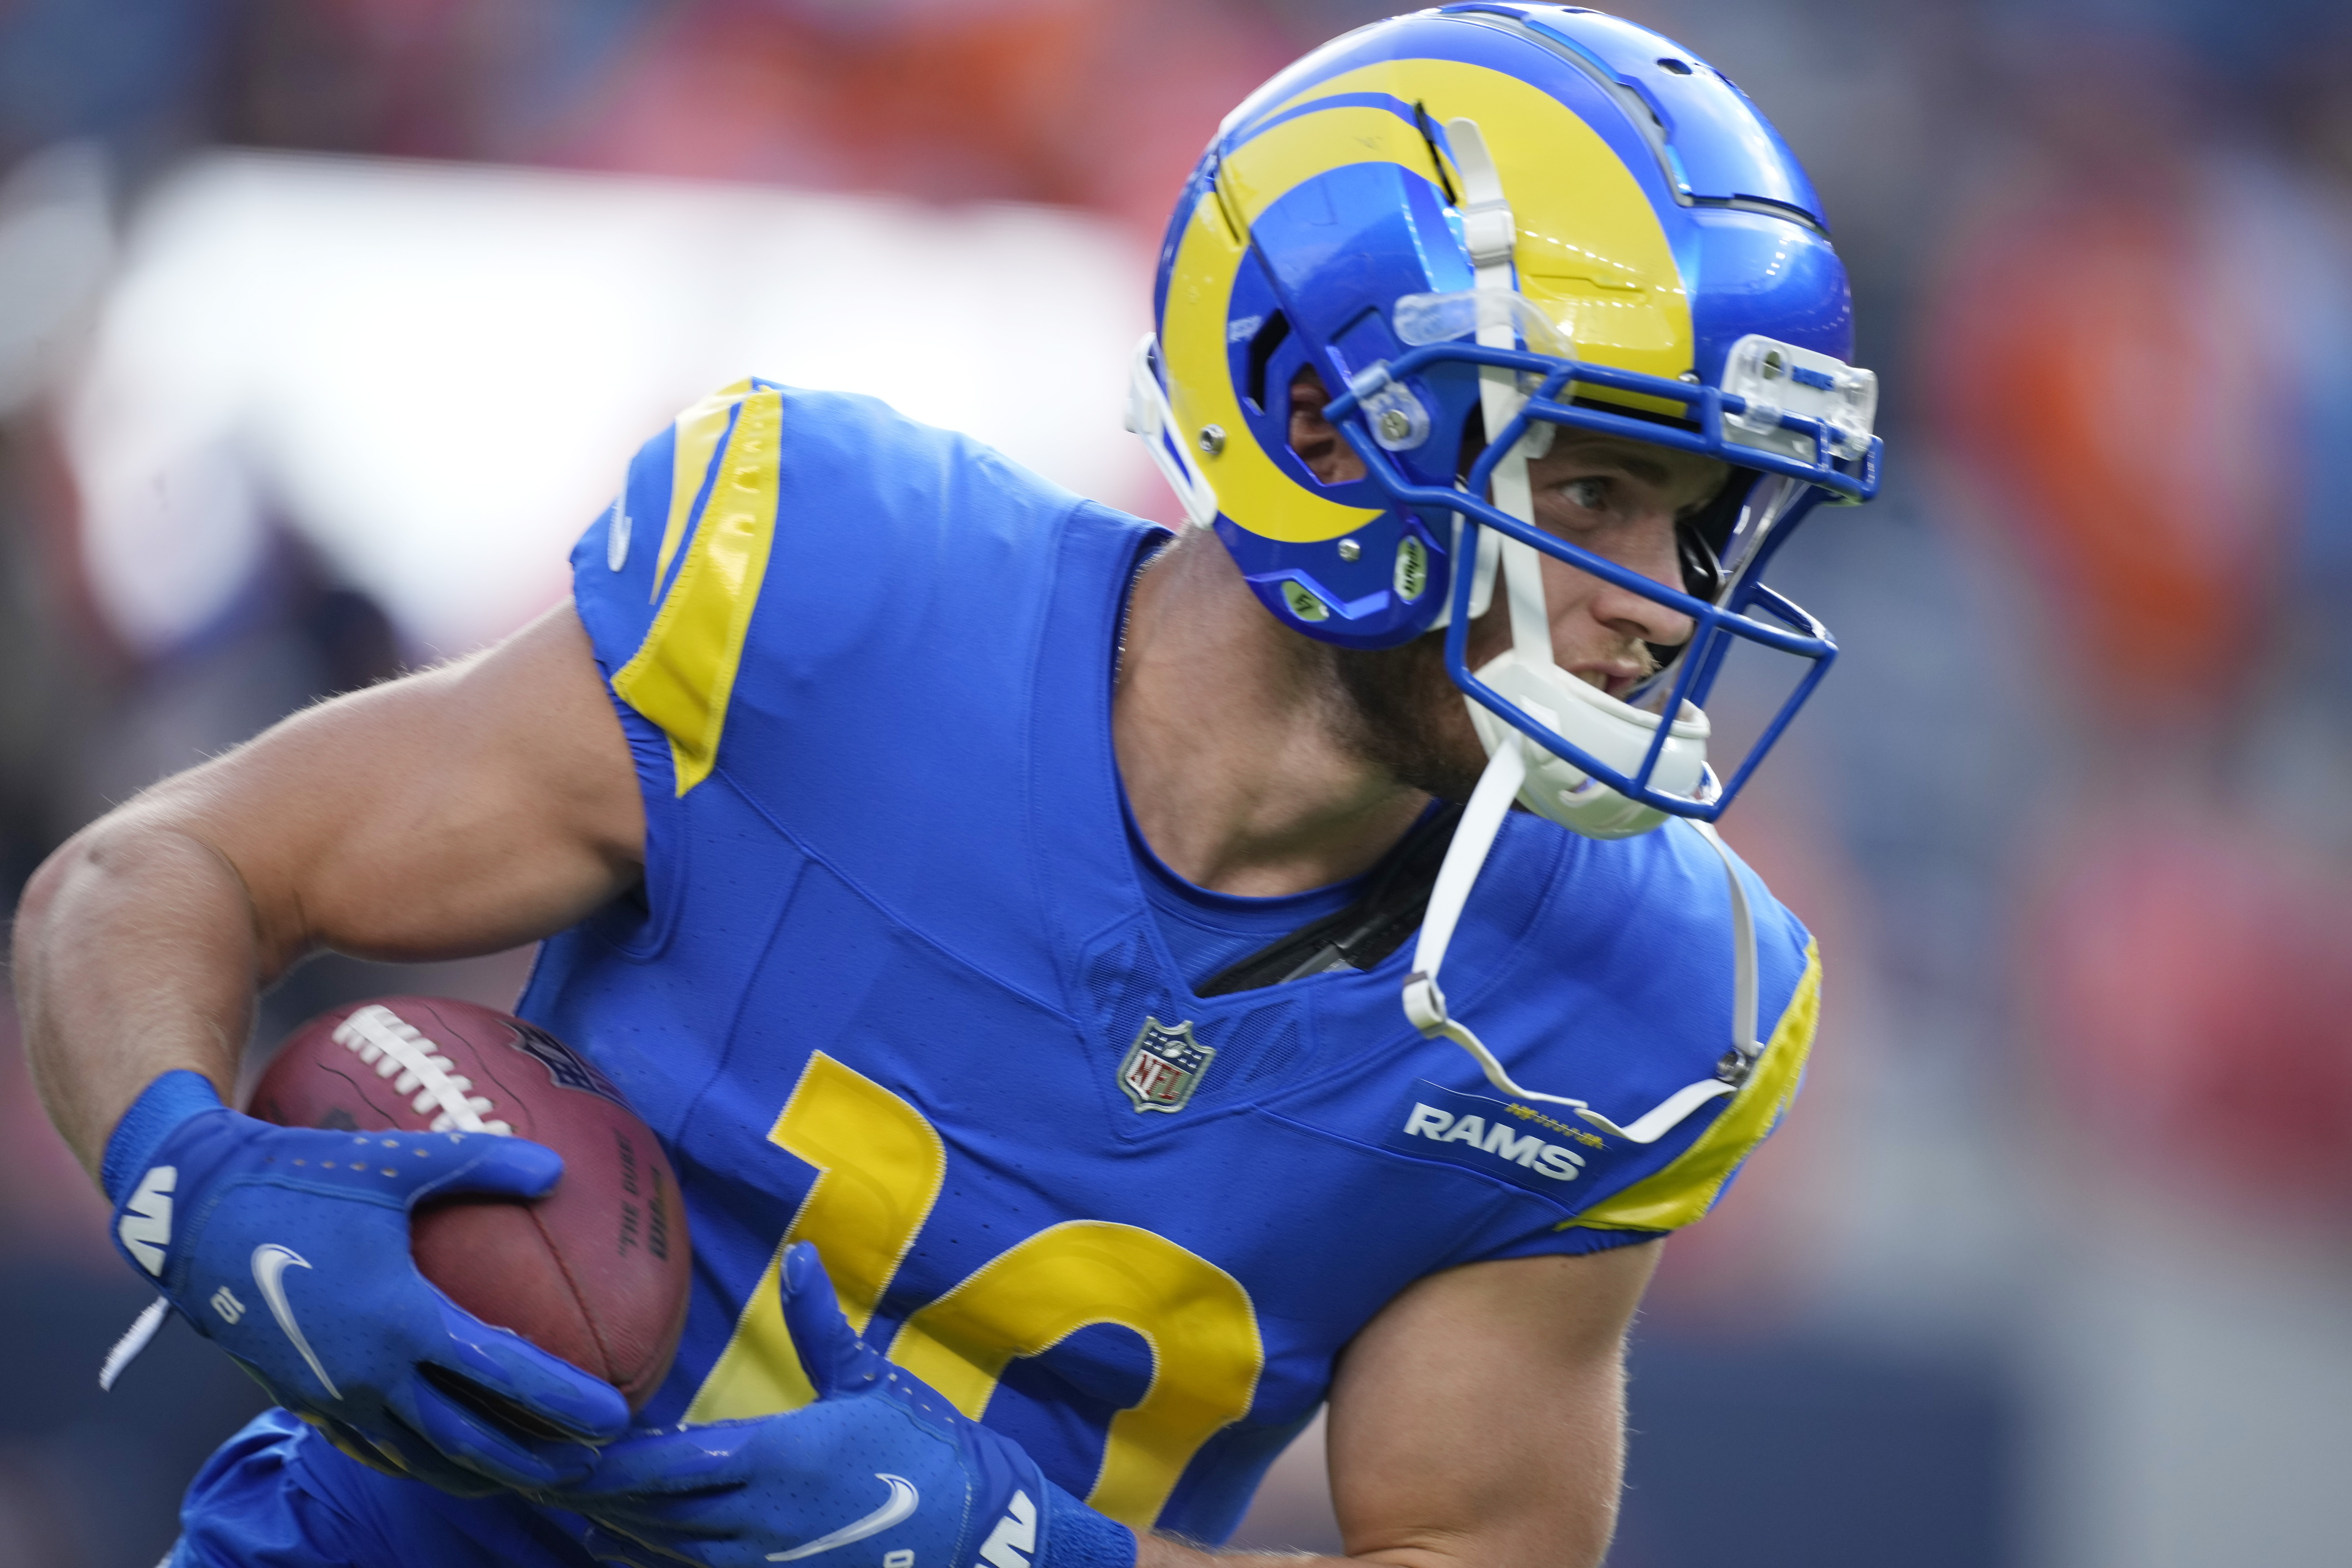 NFL notebook: Wide receiver Cooper Kupp ready for season debut